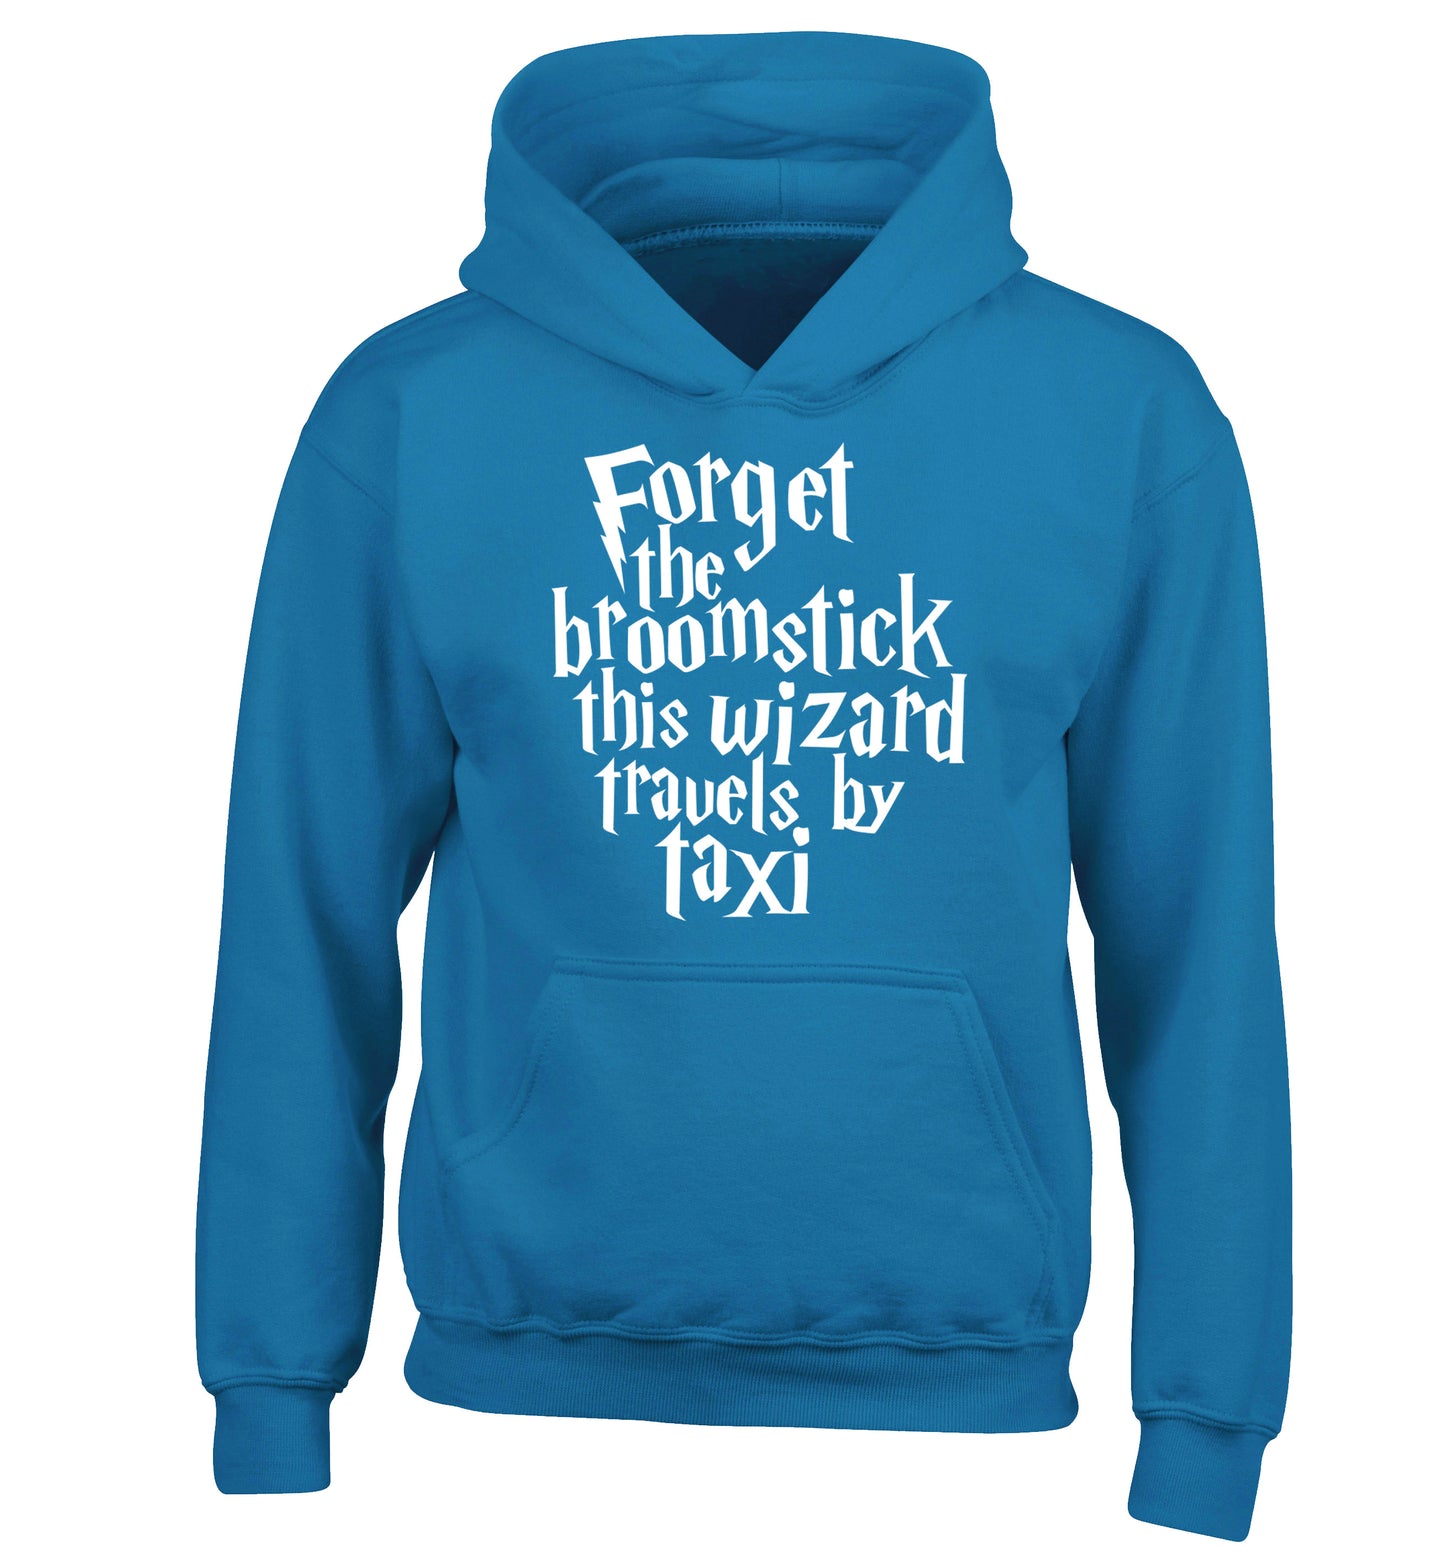 Forget the broomstick this wizard travels by taxi children's blue hoodie 12-14 Years